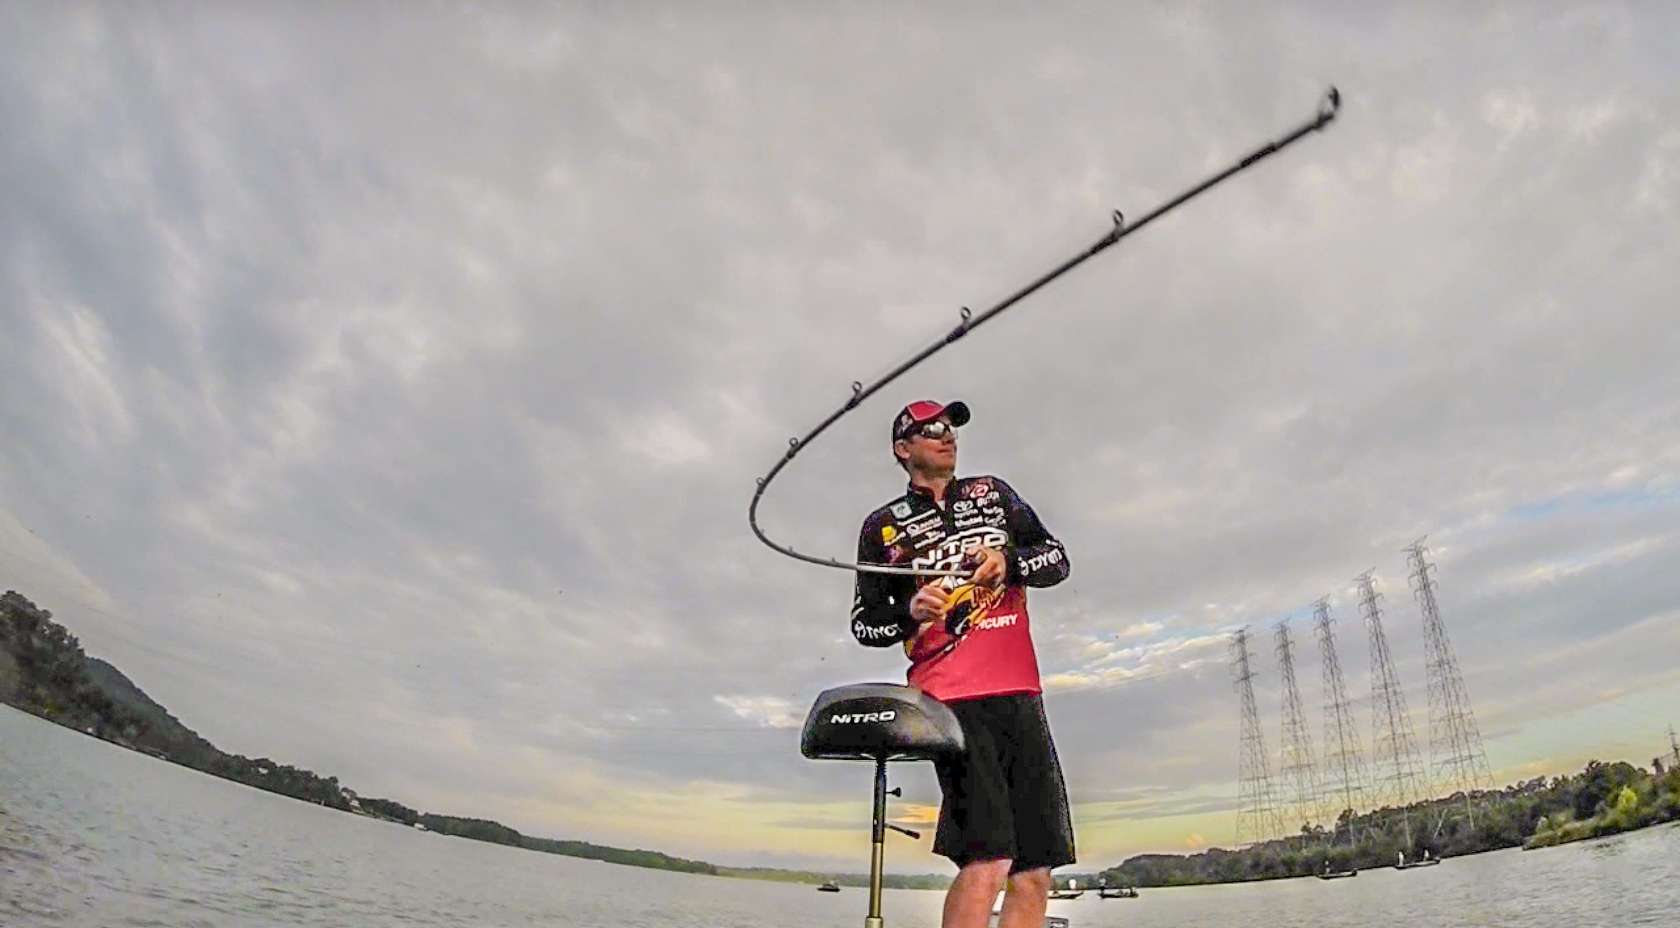 Kevin VanDam lays into a nice one. 